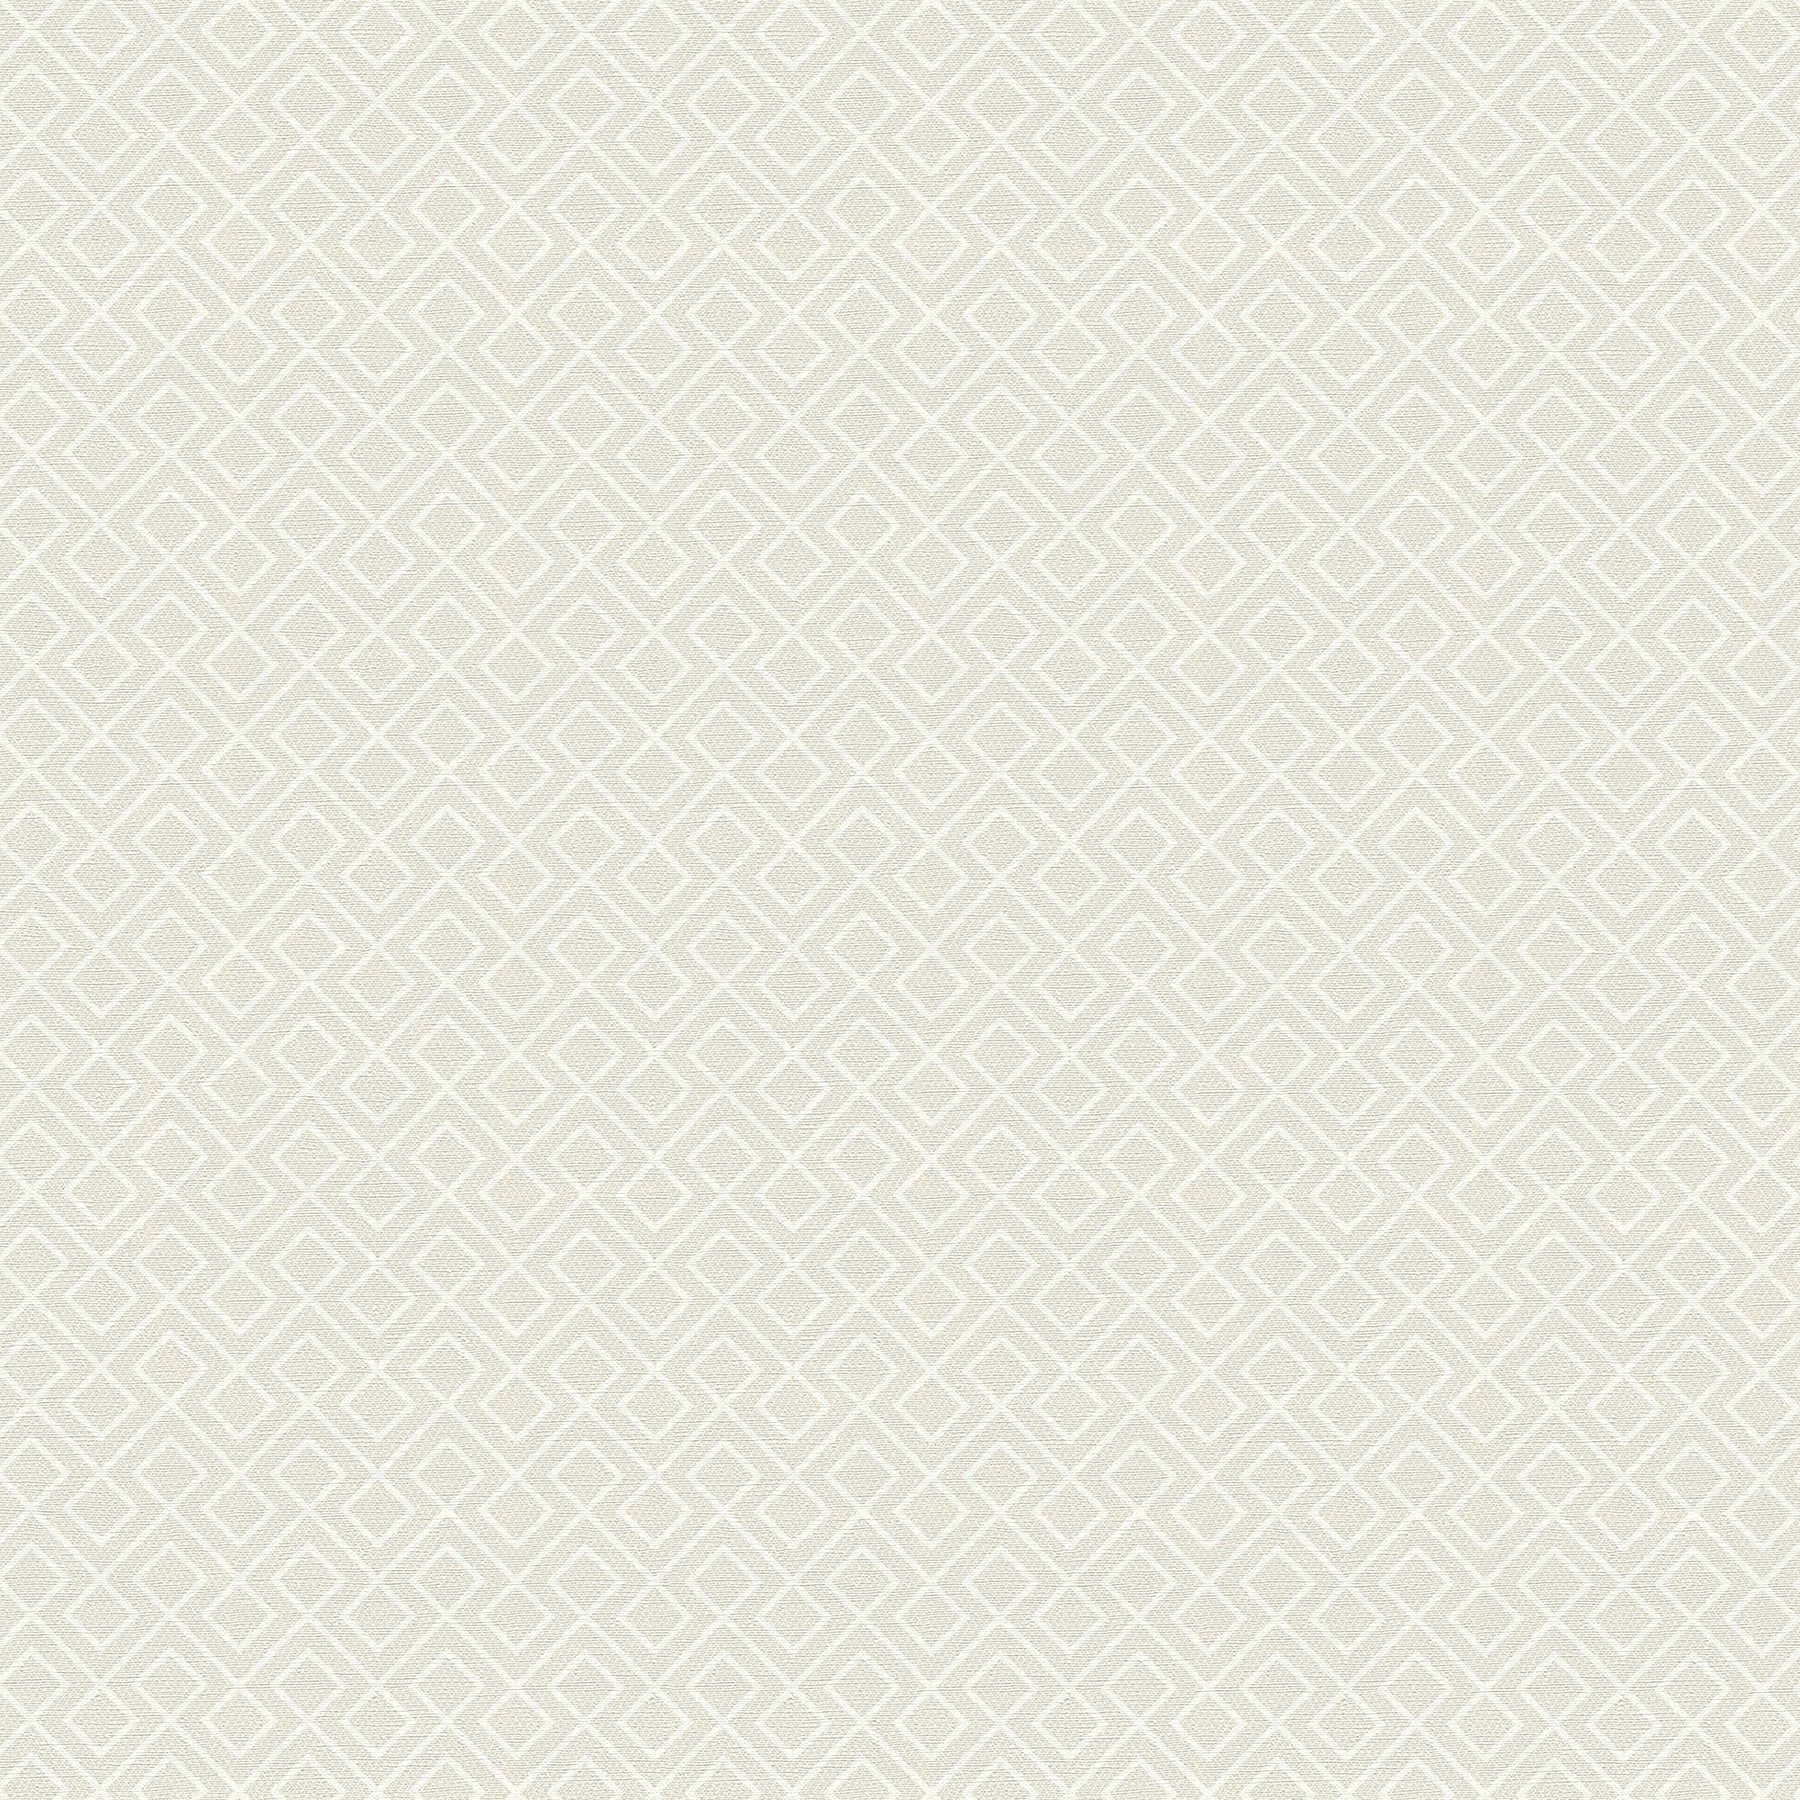         Linen look wallpaper with graphic line pattern - cream
    